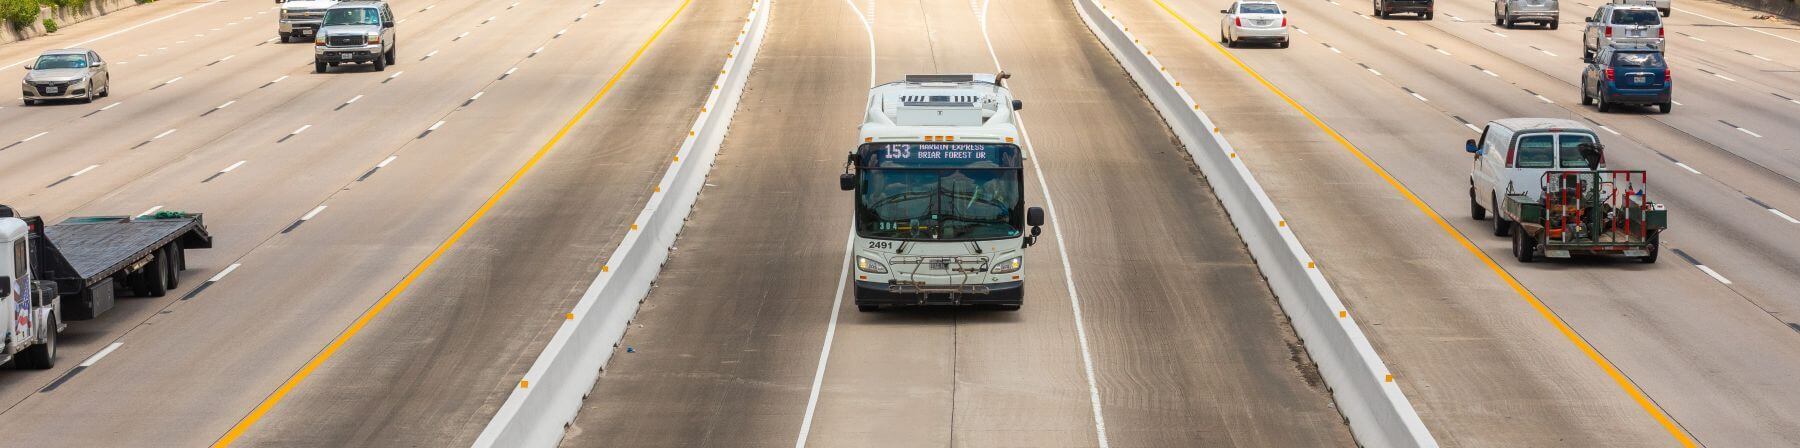 153 Harwin Express bus in Highway 59 South HOV express lane